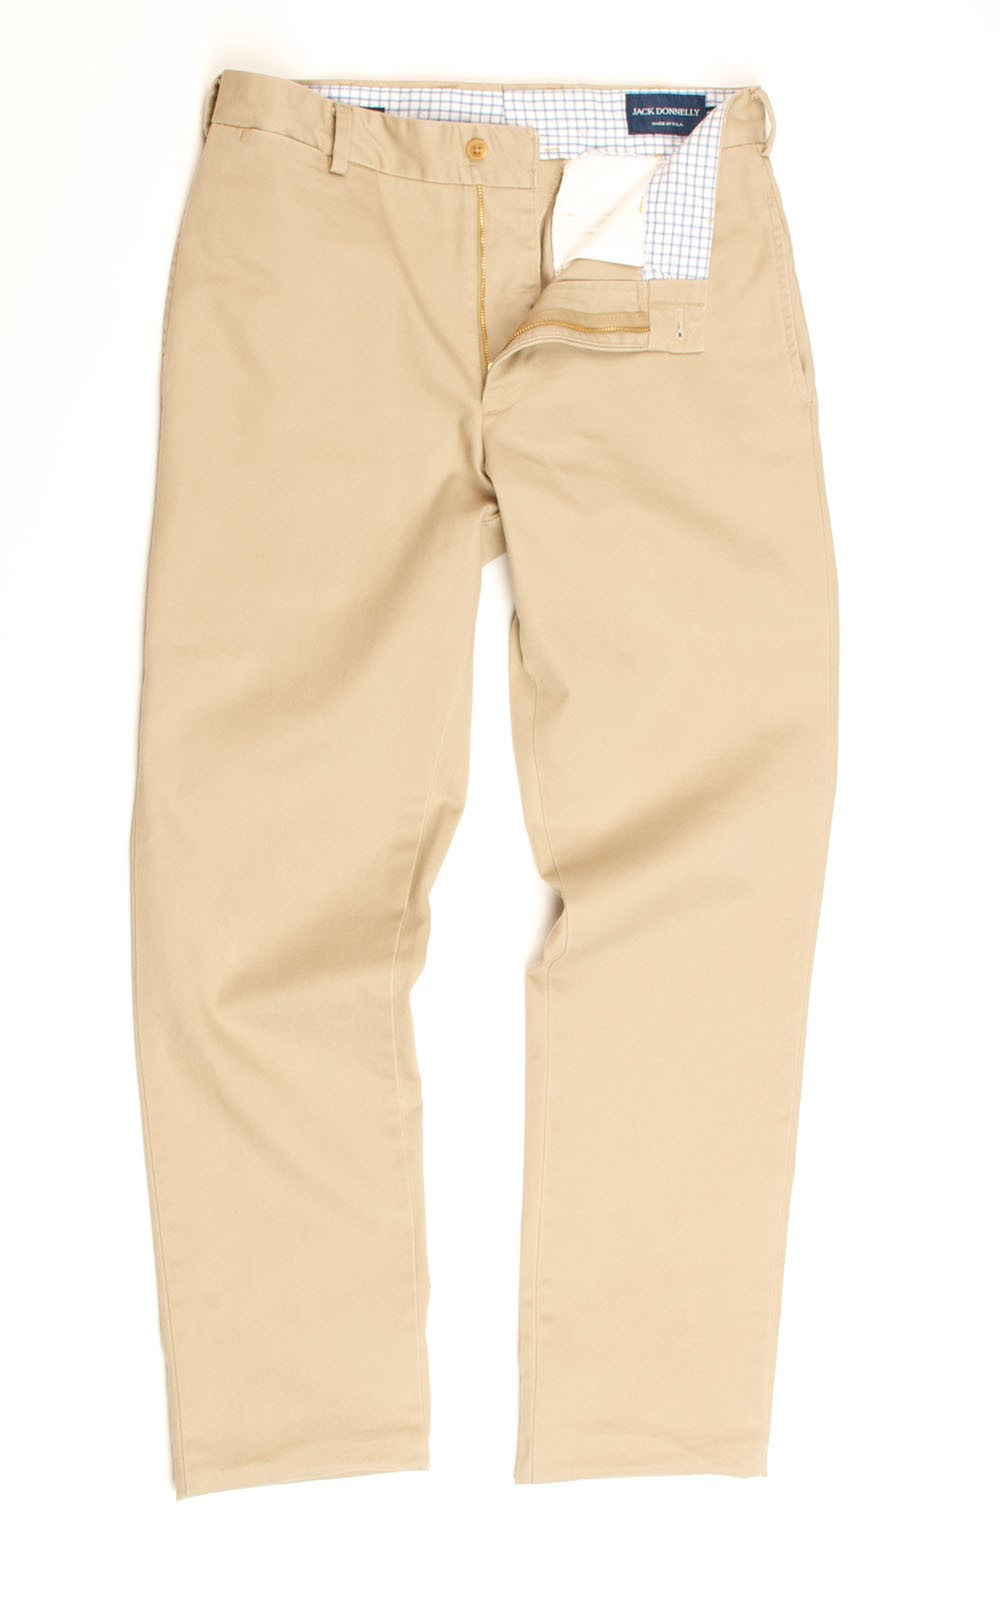 Khakis: Pants to Live By – Off the Cuff